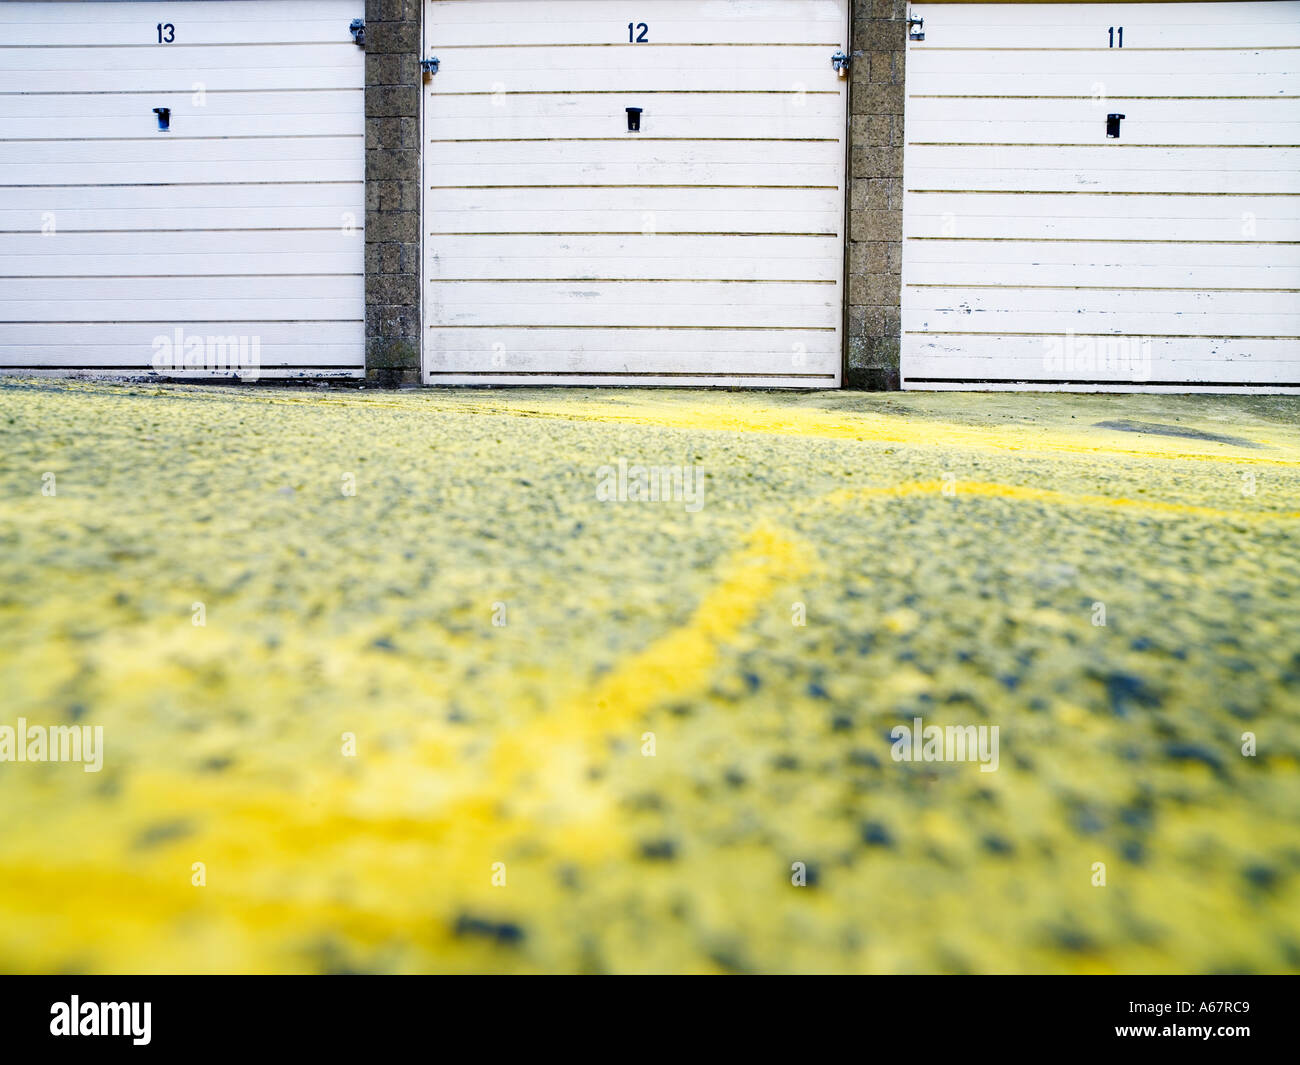 a row of three numbered garage doors yellow paint on gound in front Stock Photo